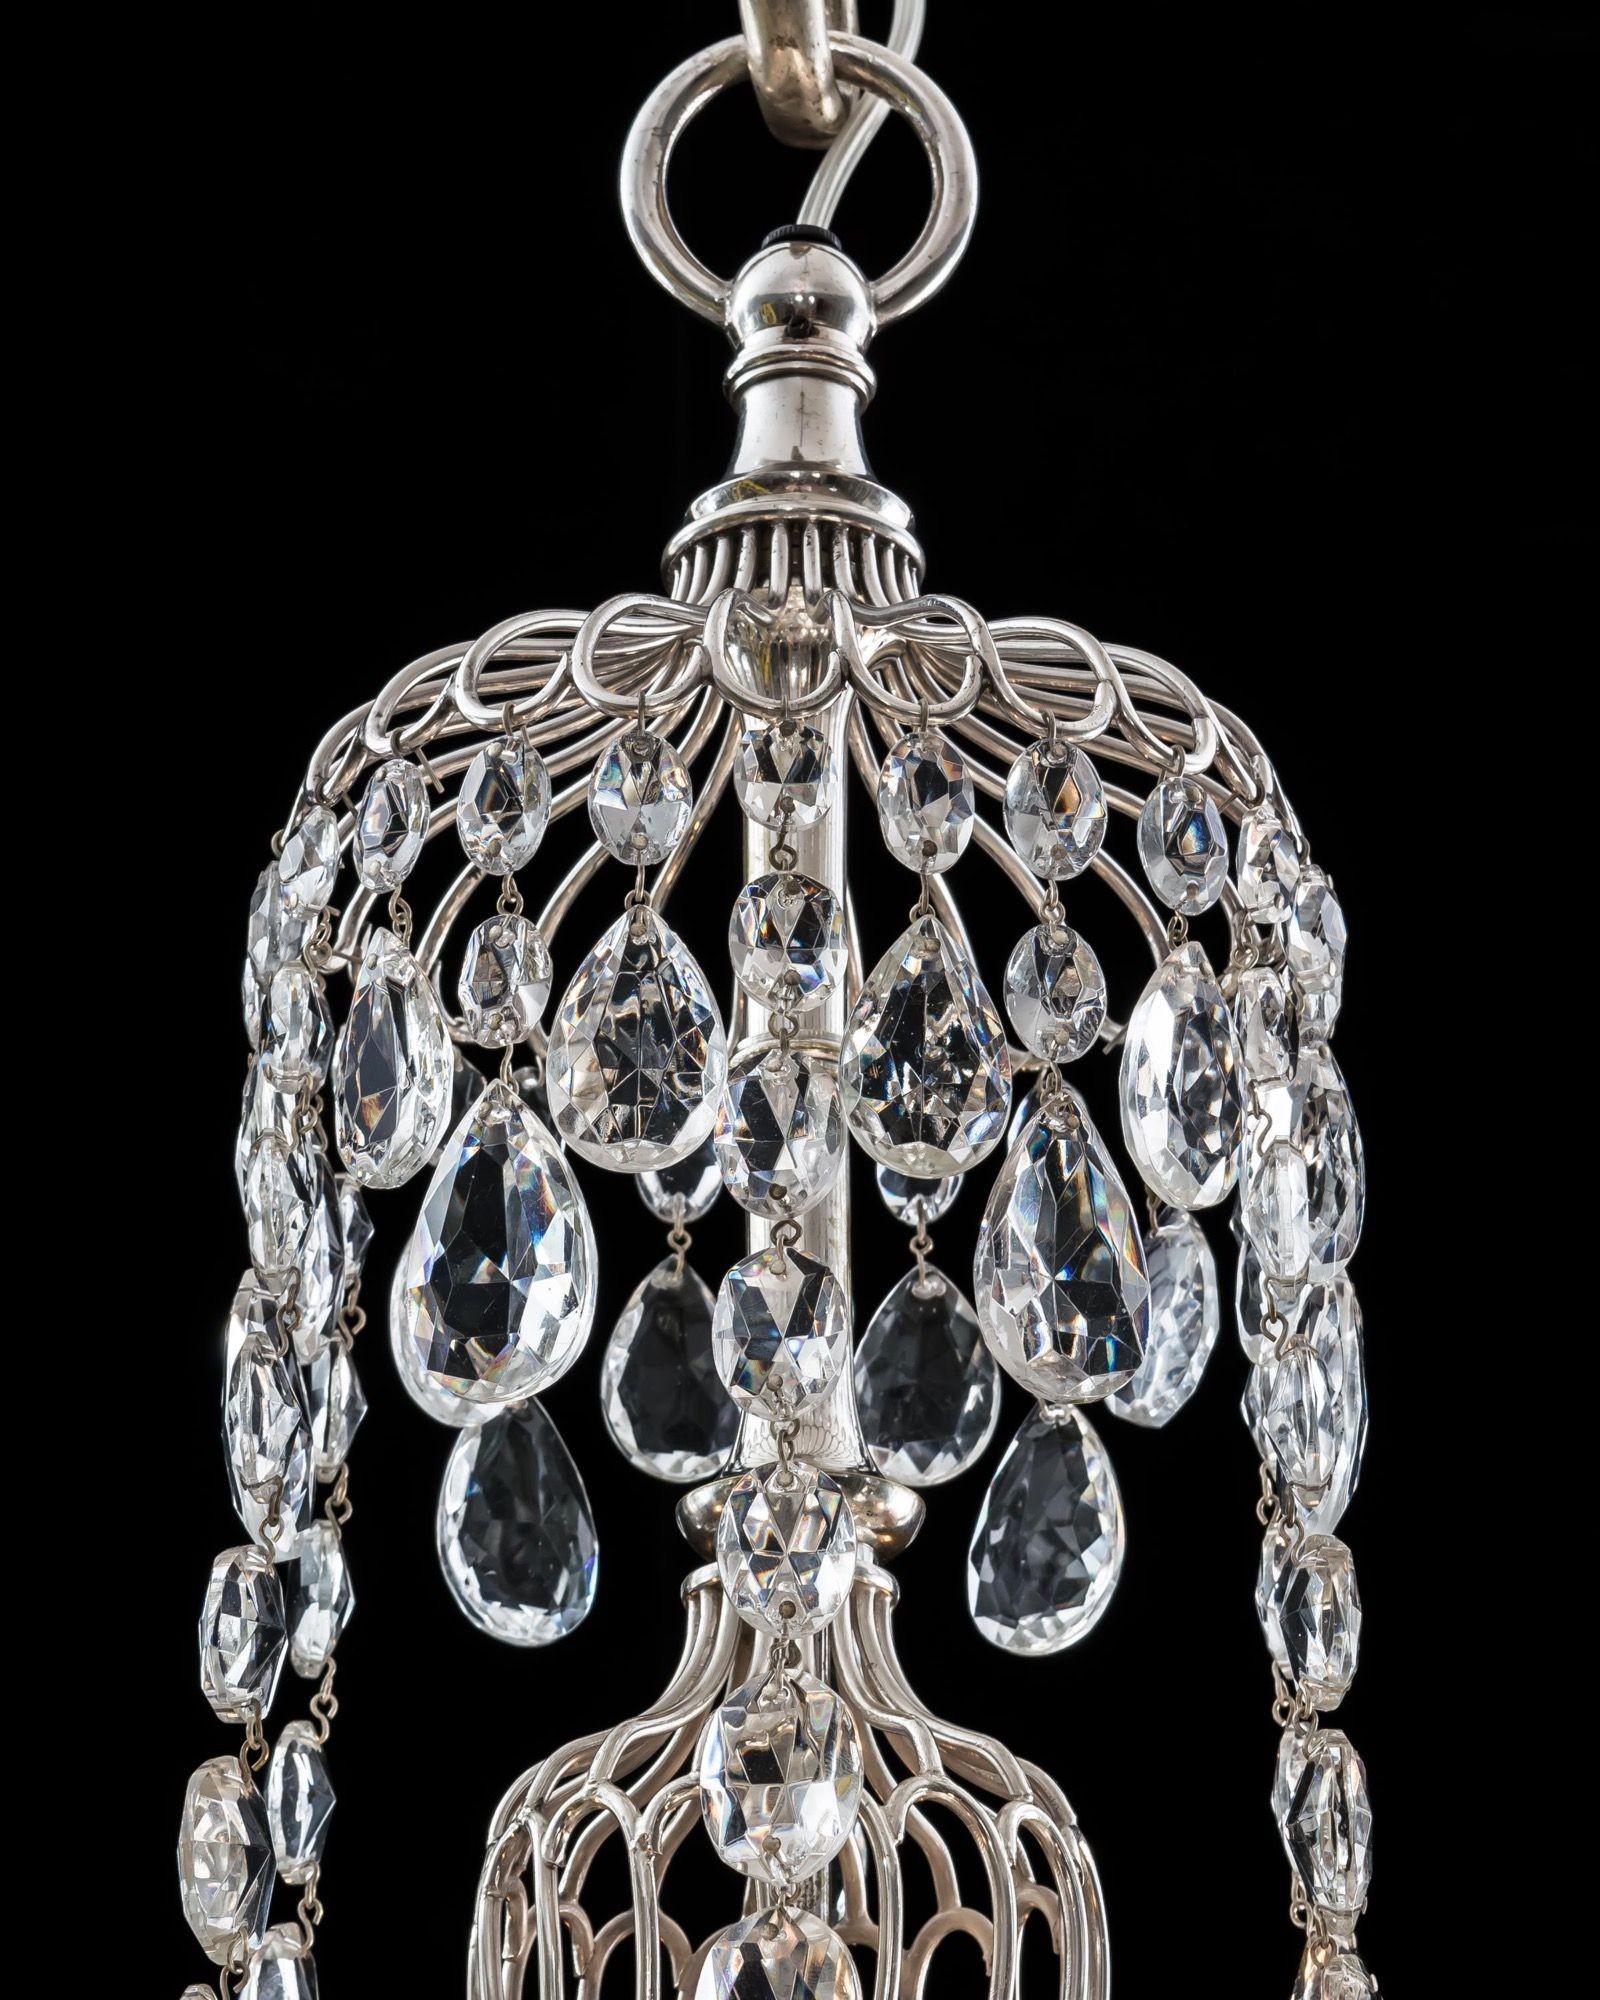 A Pair Of Silvered and Crystal Chandeliers By Osler & Faraday  In Good Condition For Sale In Steyning, West sussex